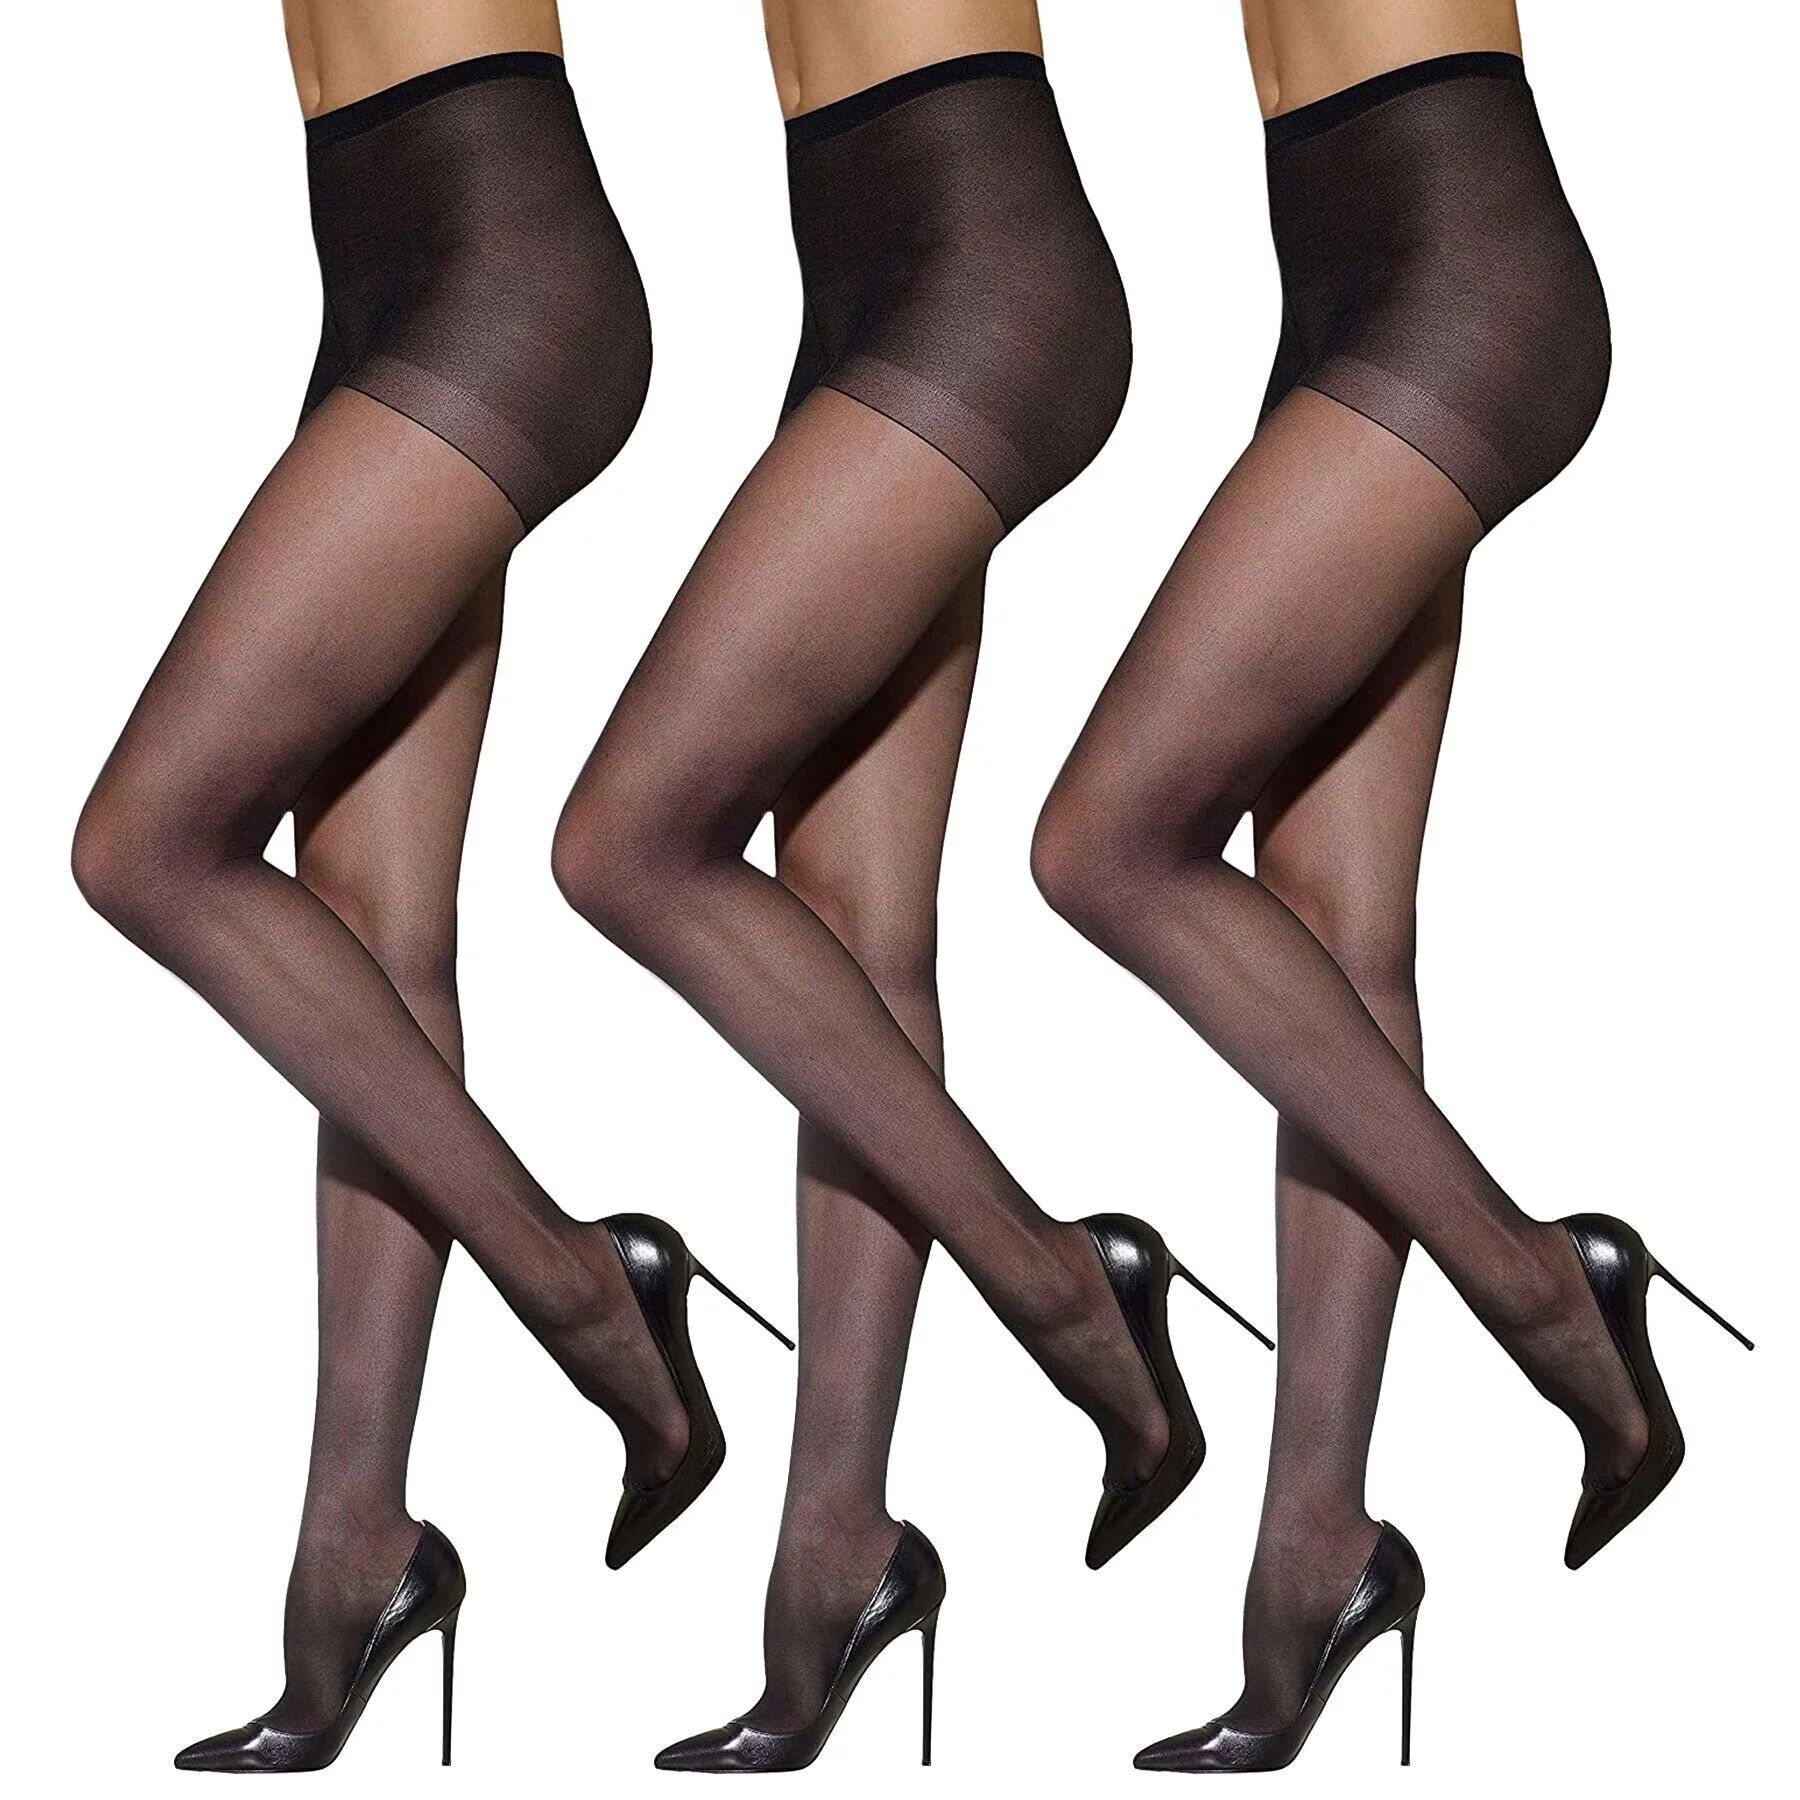 MXKF Black Tights for Women , 3 Pairs Women's Sheer Tights 15D Control Top Pantyhose with Reinfor... | Walmart (US)